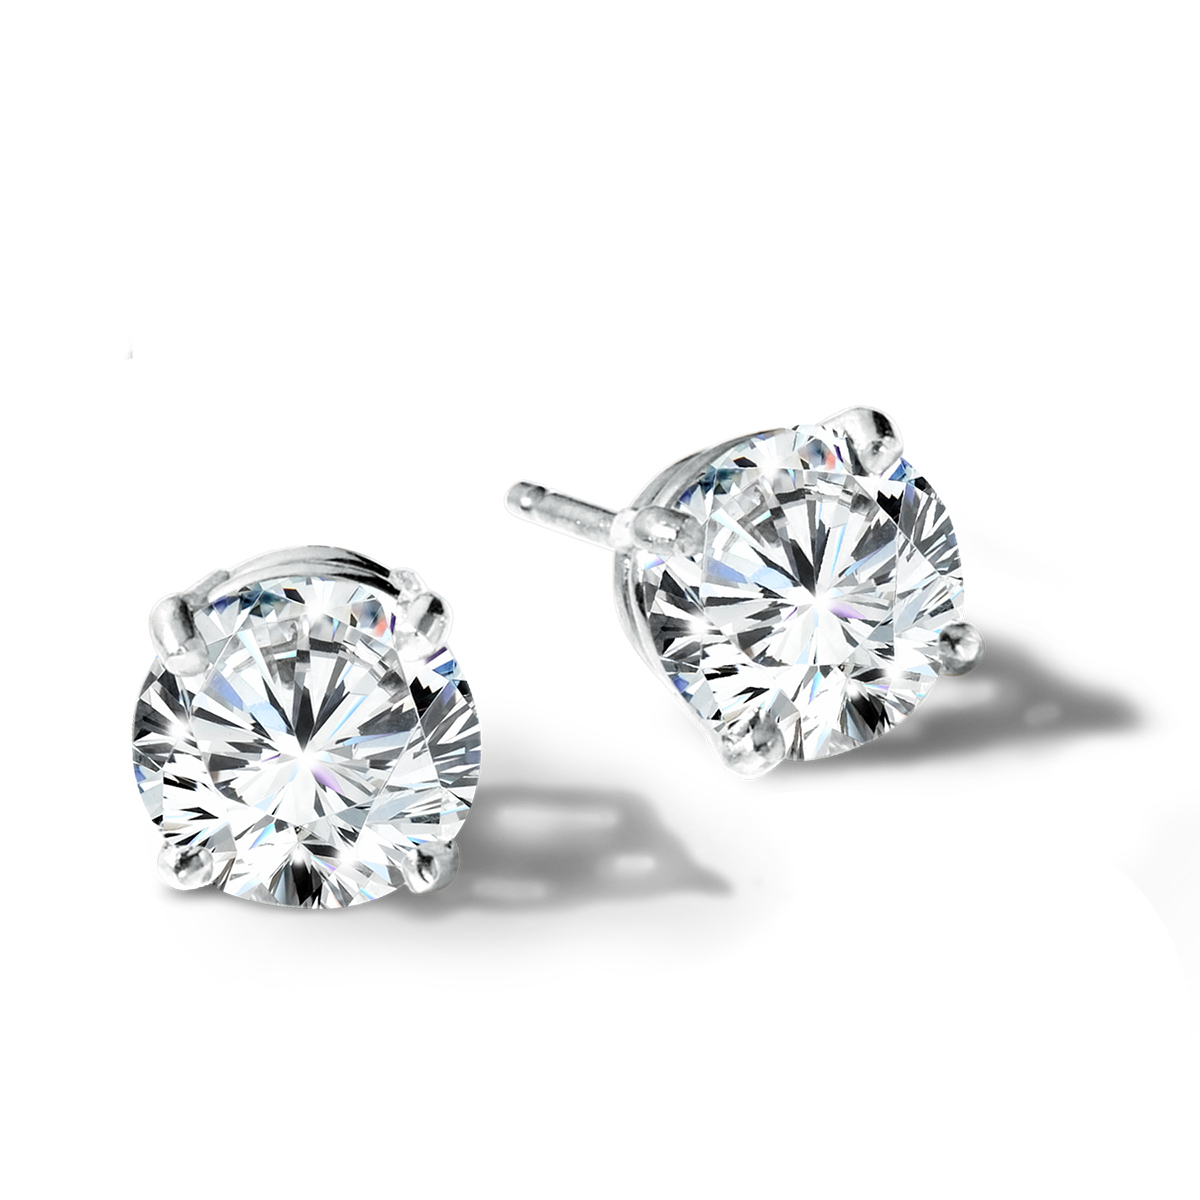 2ctw Lab Grown Round Diamond Solitaire Earrings